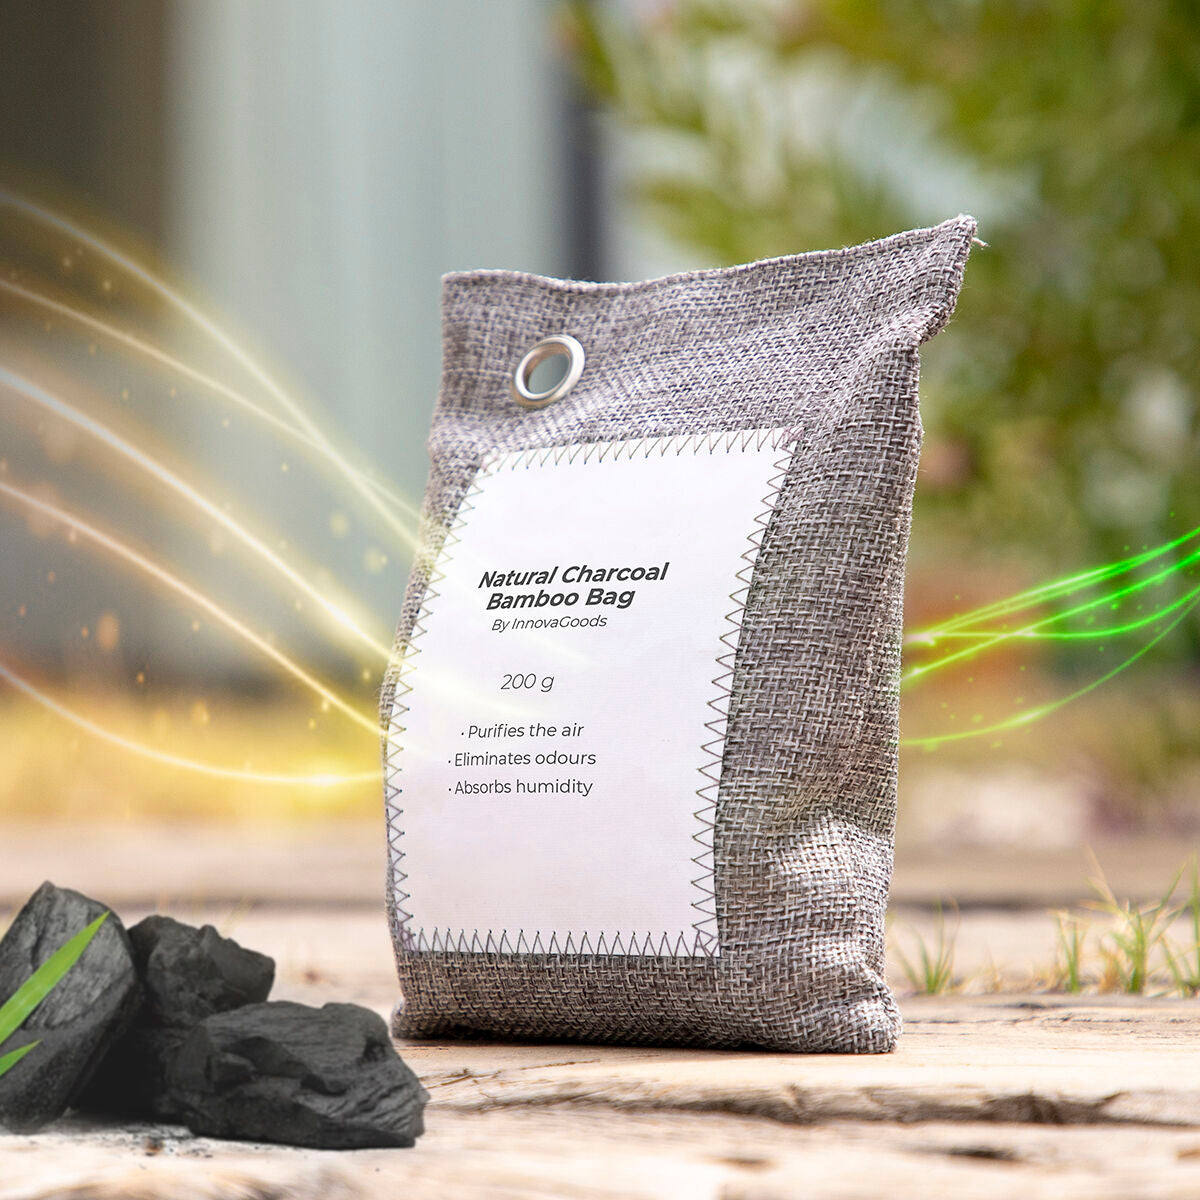 Set of Air Purifying Bags with Activated Carbon Bacoal InnovaGoods (pack of 2)